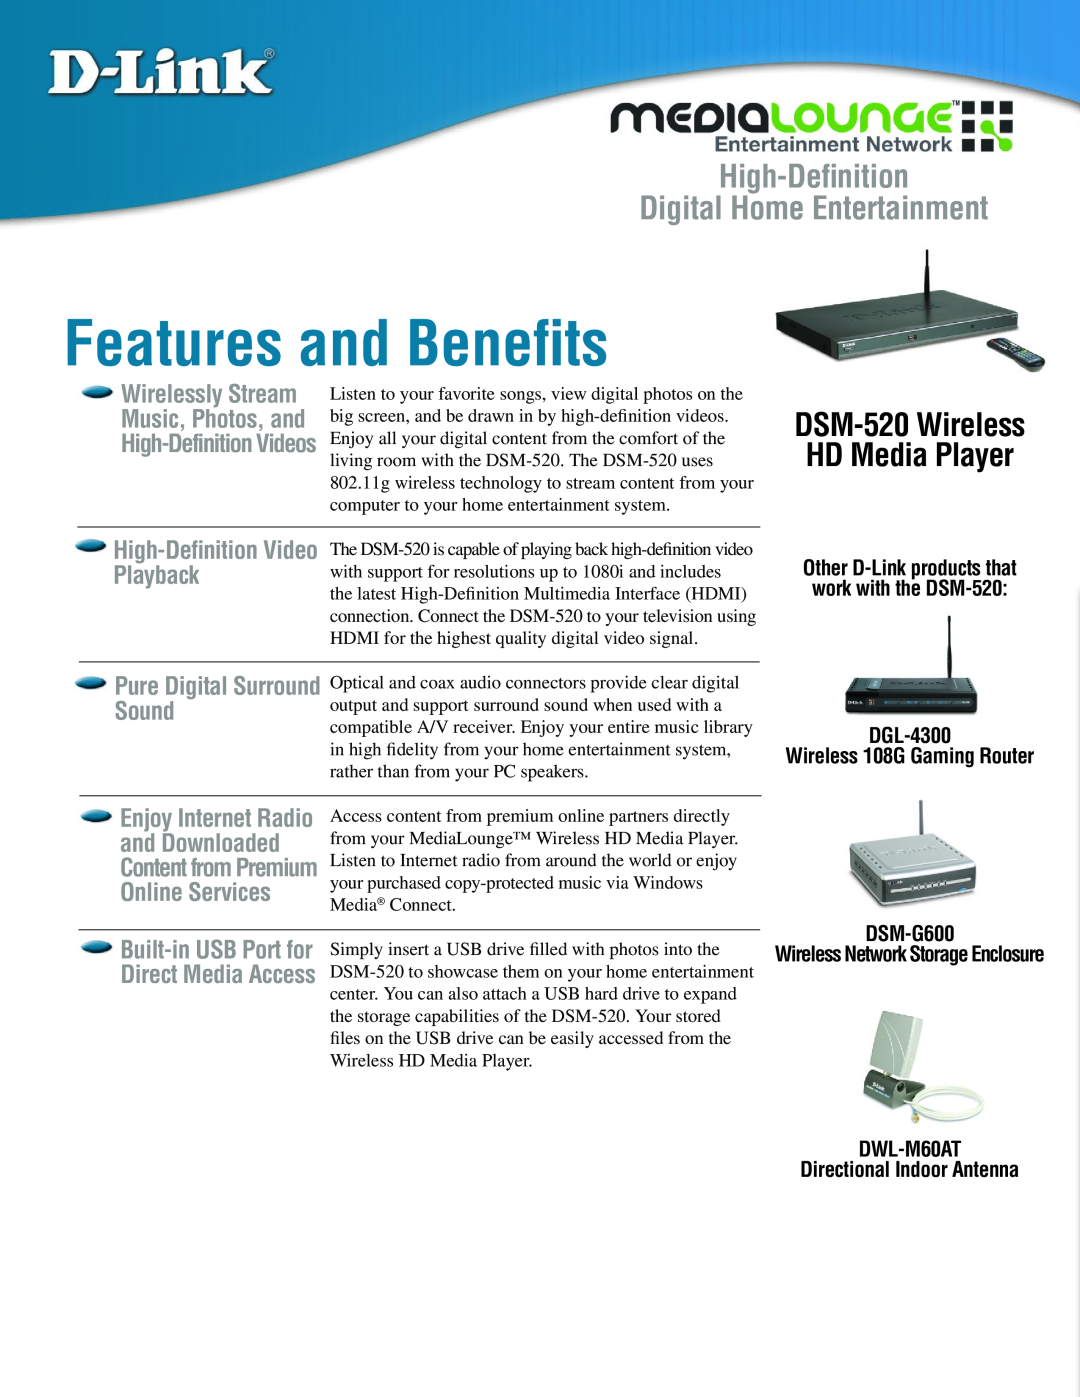 D-Link DSM-G600 manual Features and Beneﬁts, High-Deﬁnition Digital Home Entertainment, DSM-520Wireless HD Media Player 